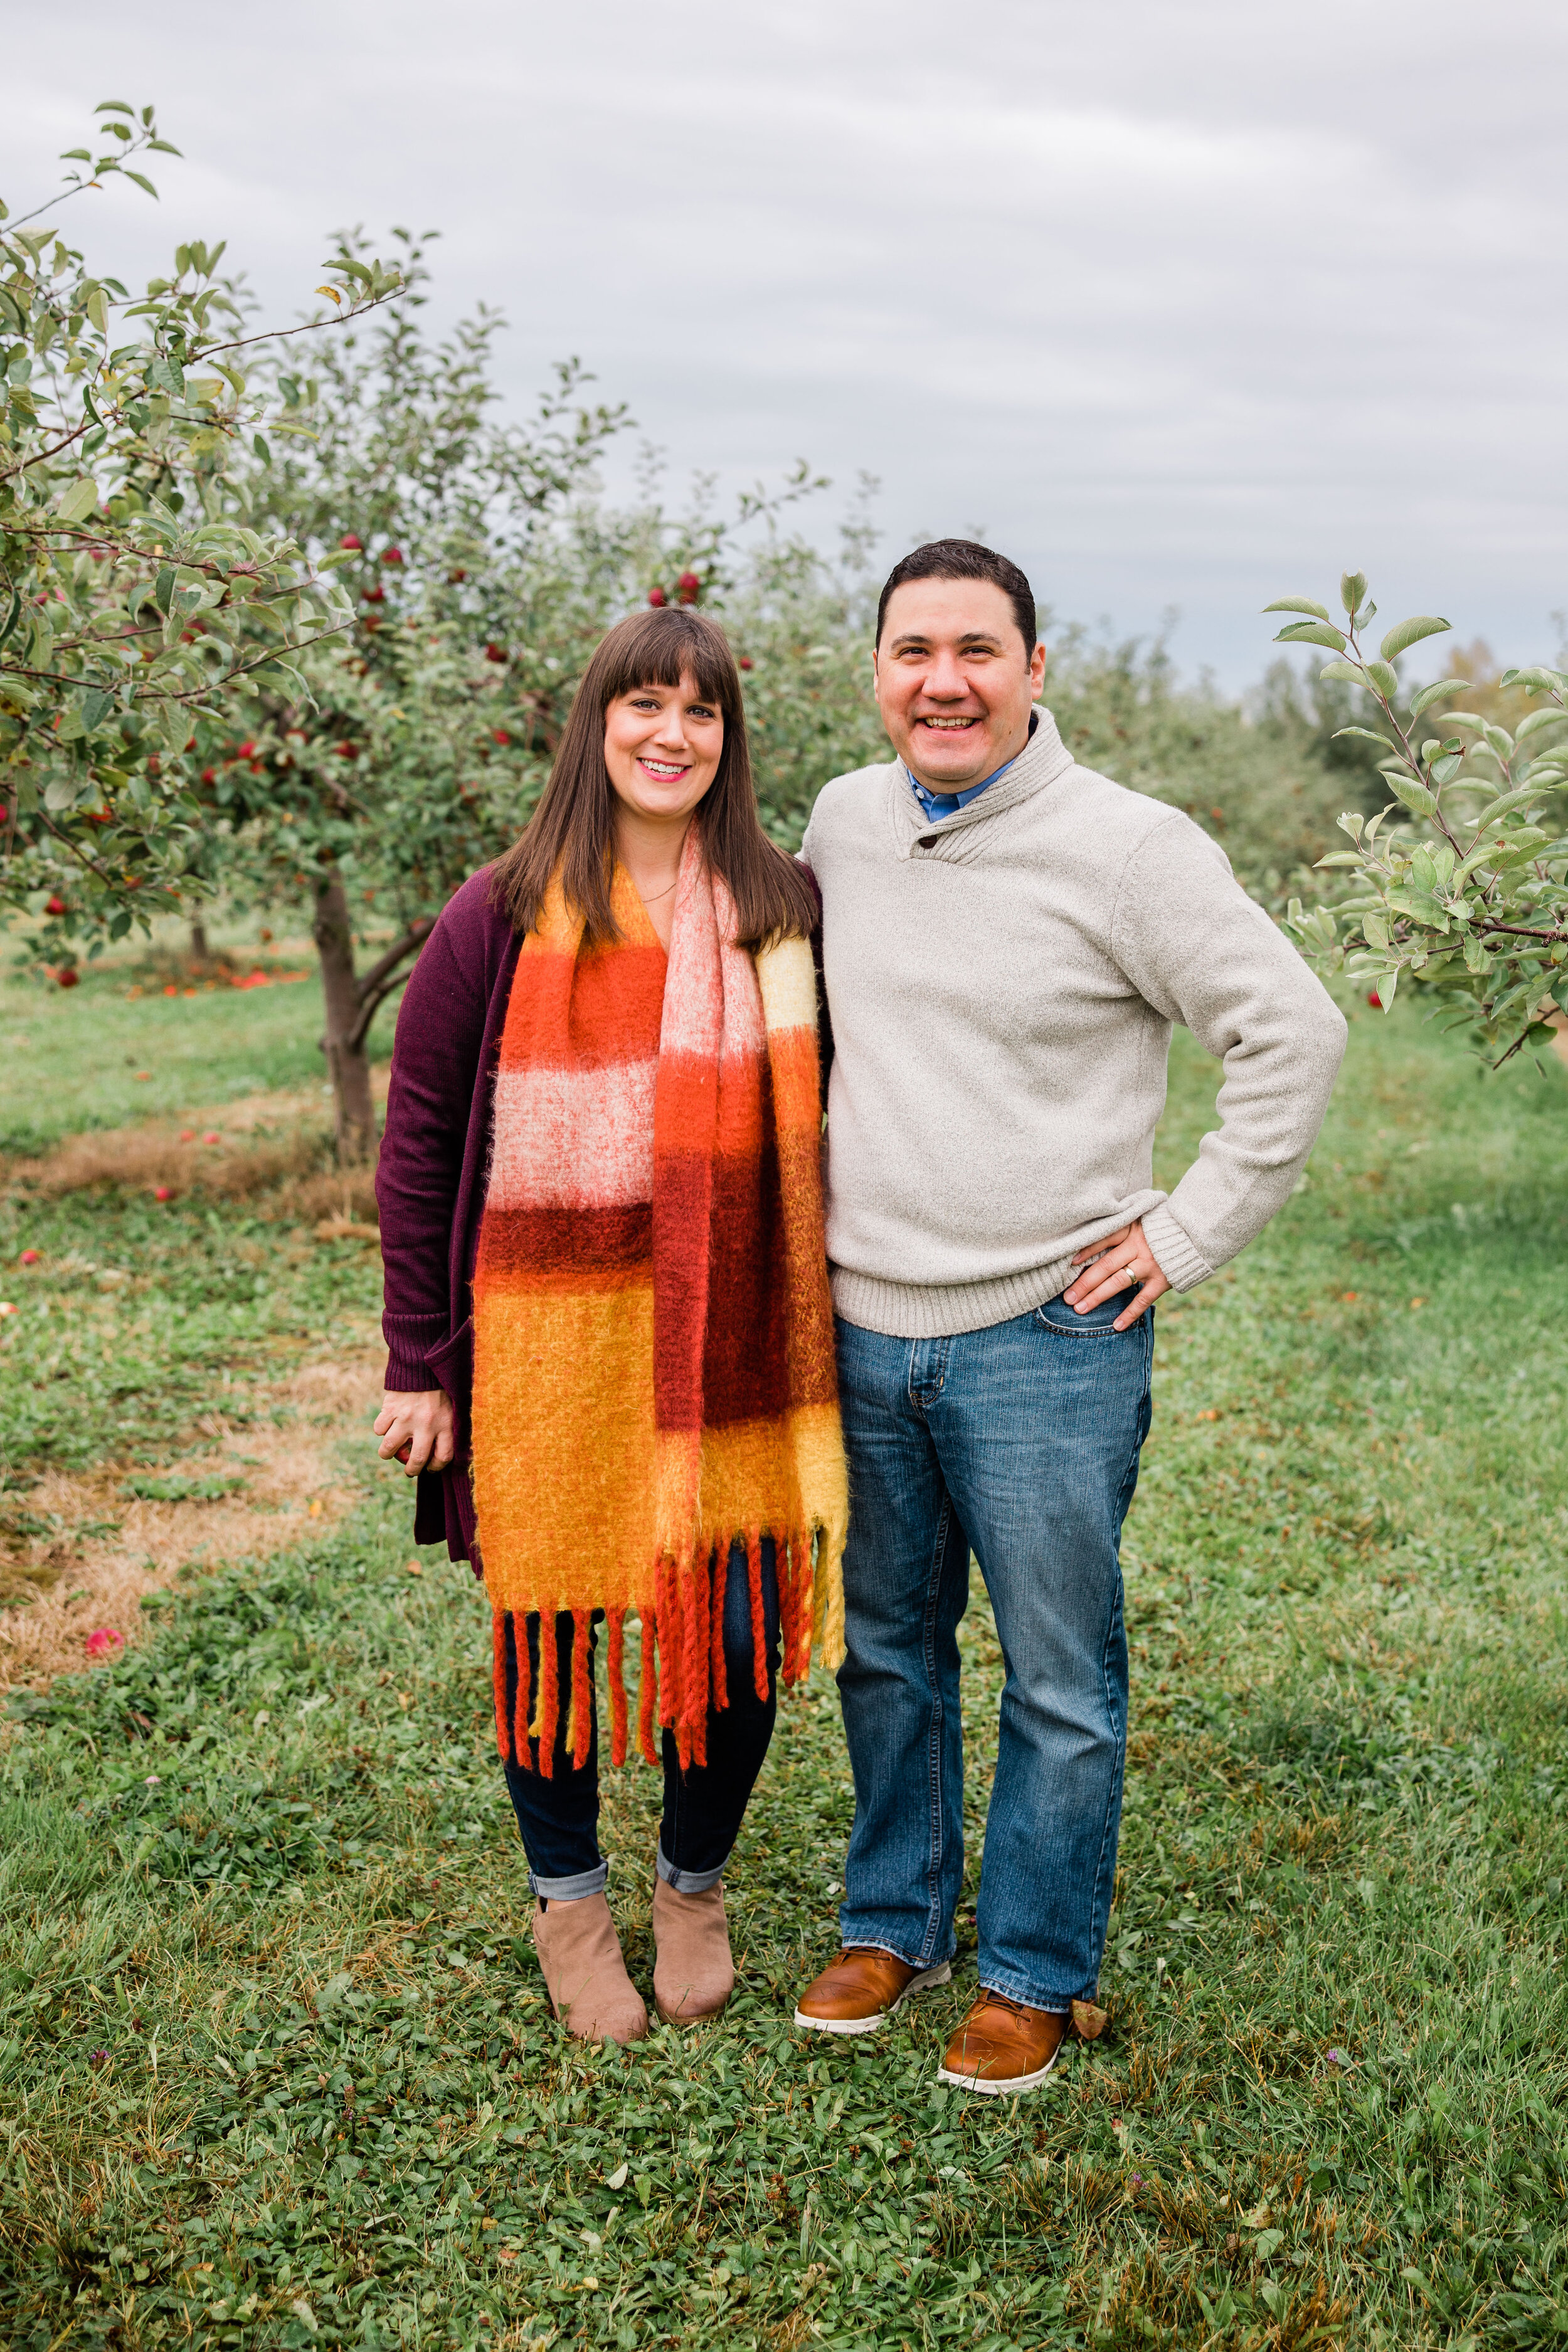 Mini Session at Robertson Orchards-4.jpg